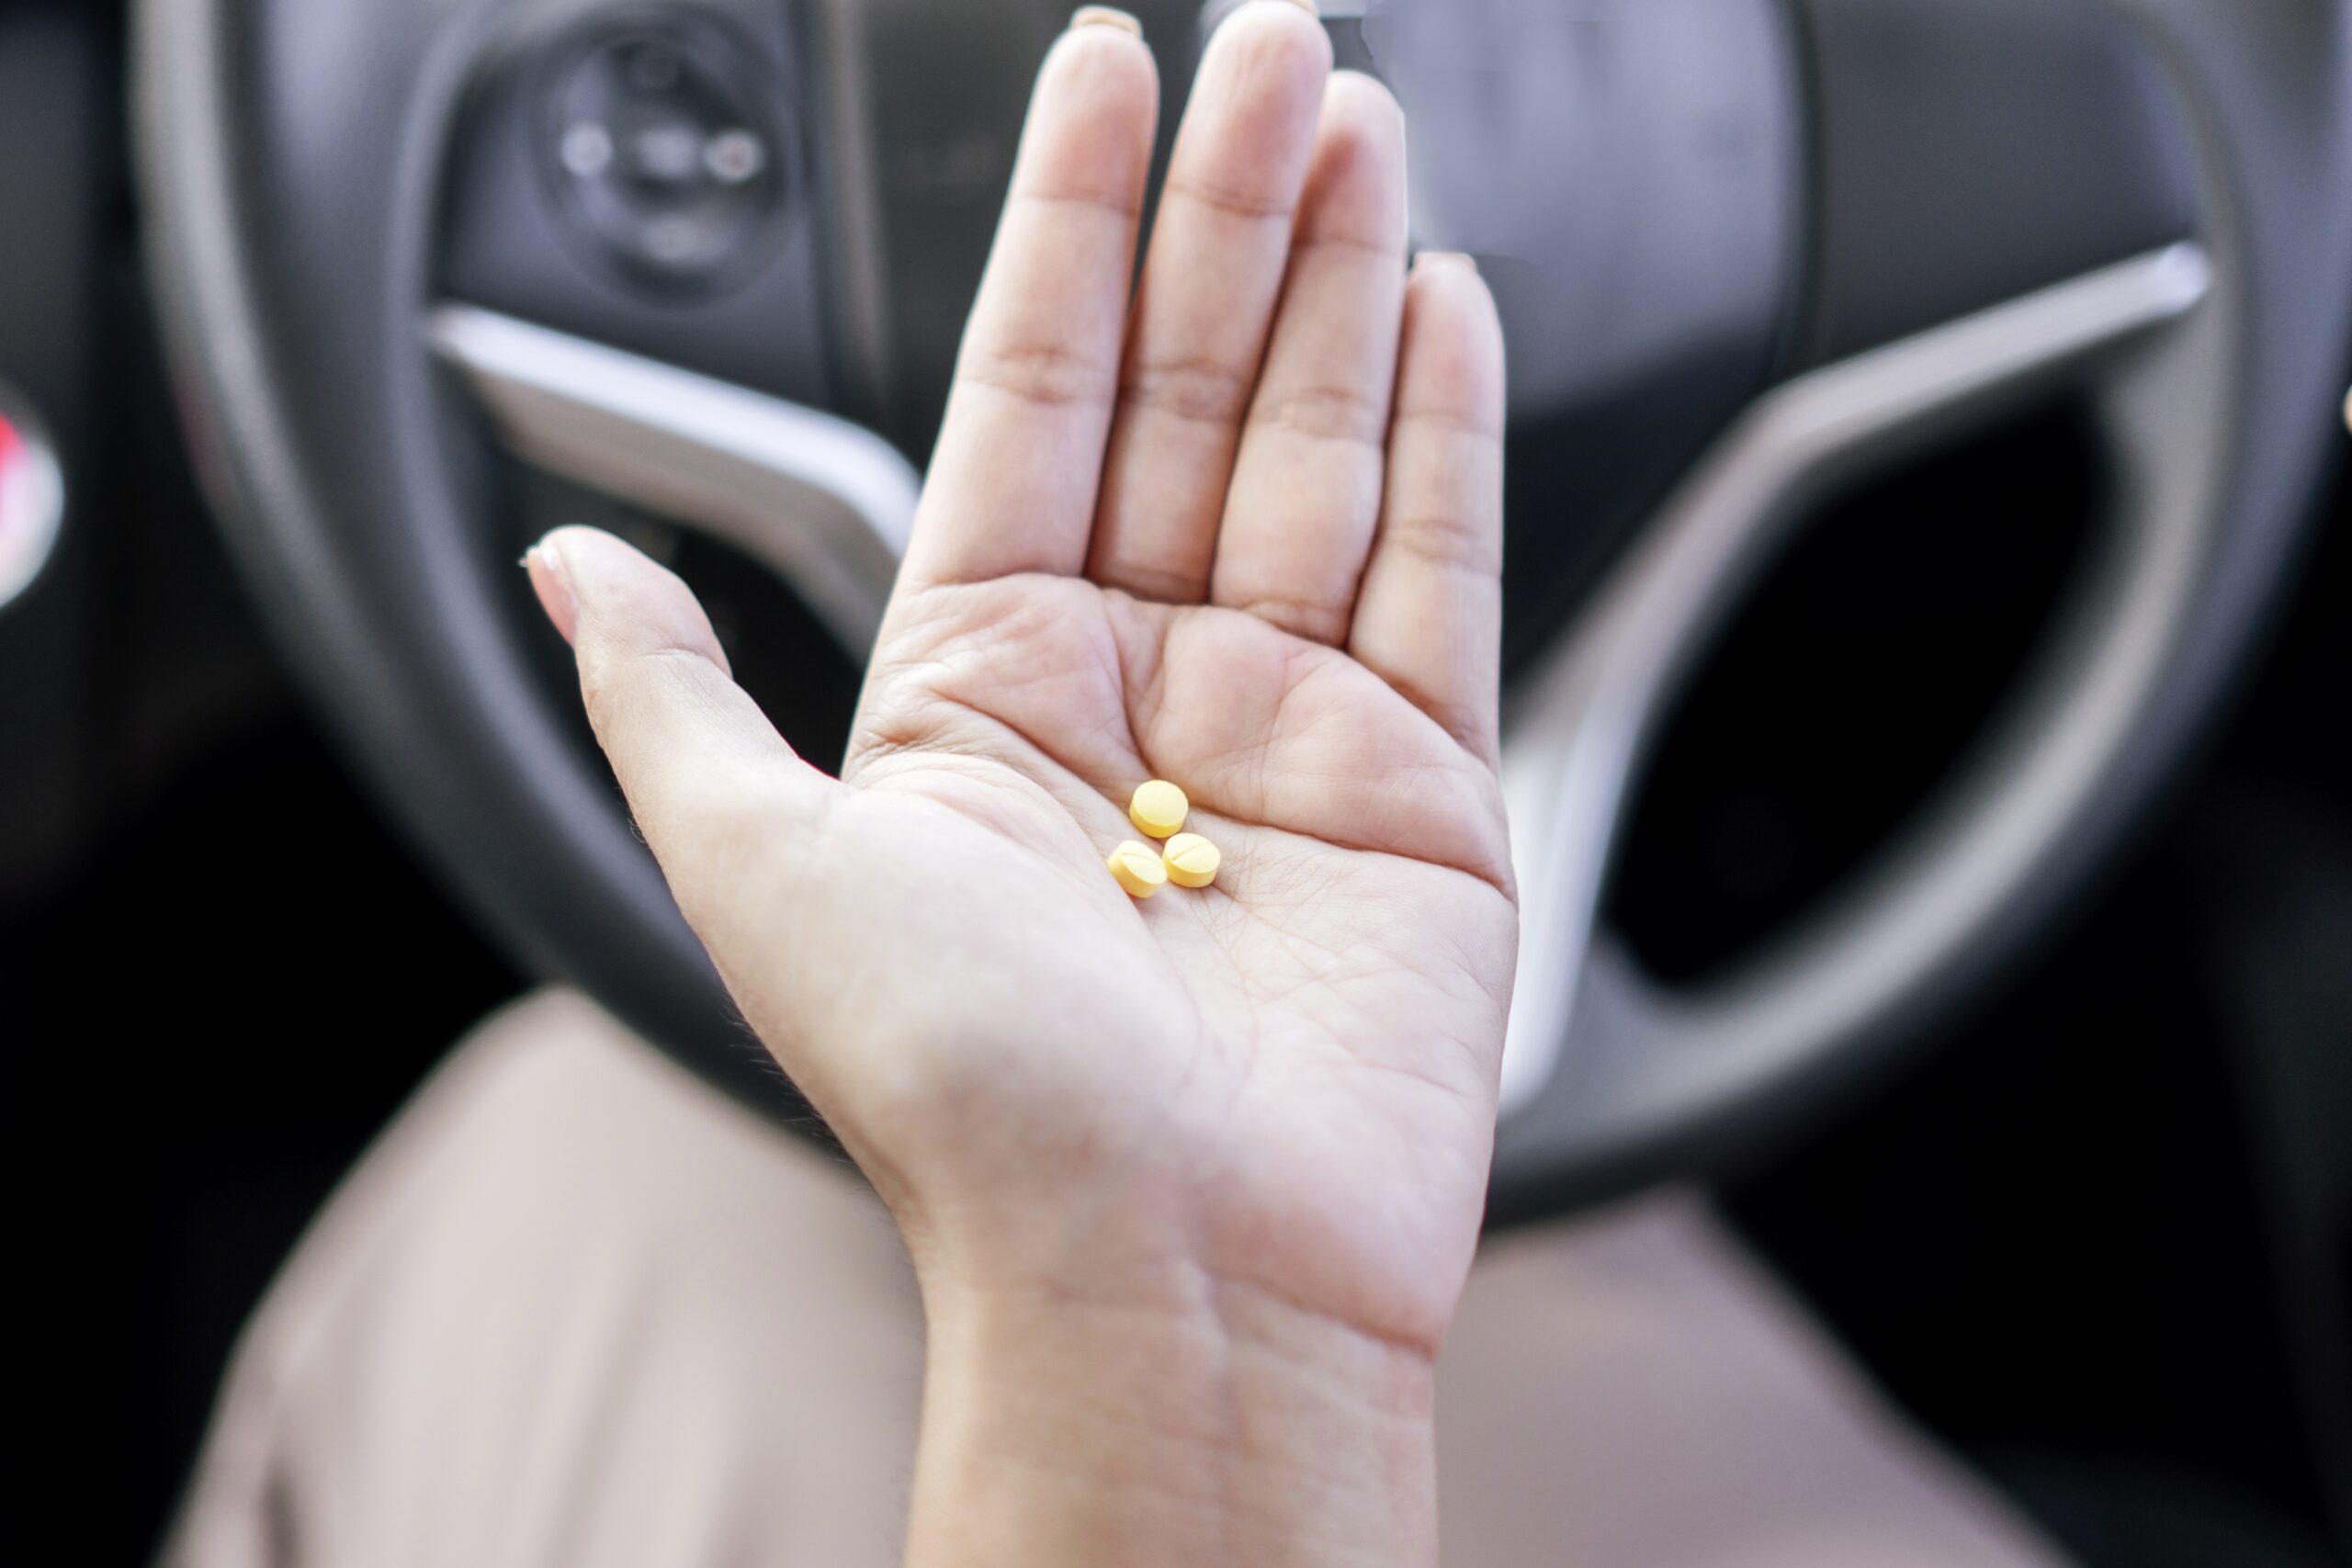 Texas woman behind the wheel of a car with prescription drugs in her hands.